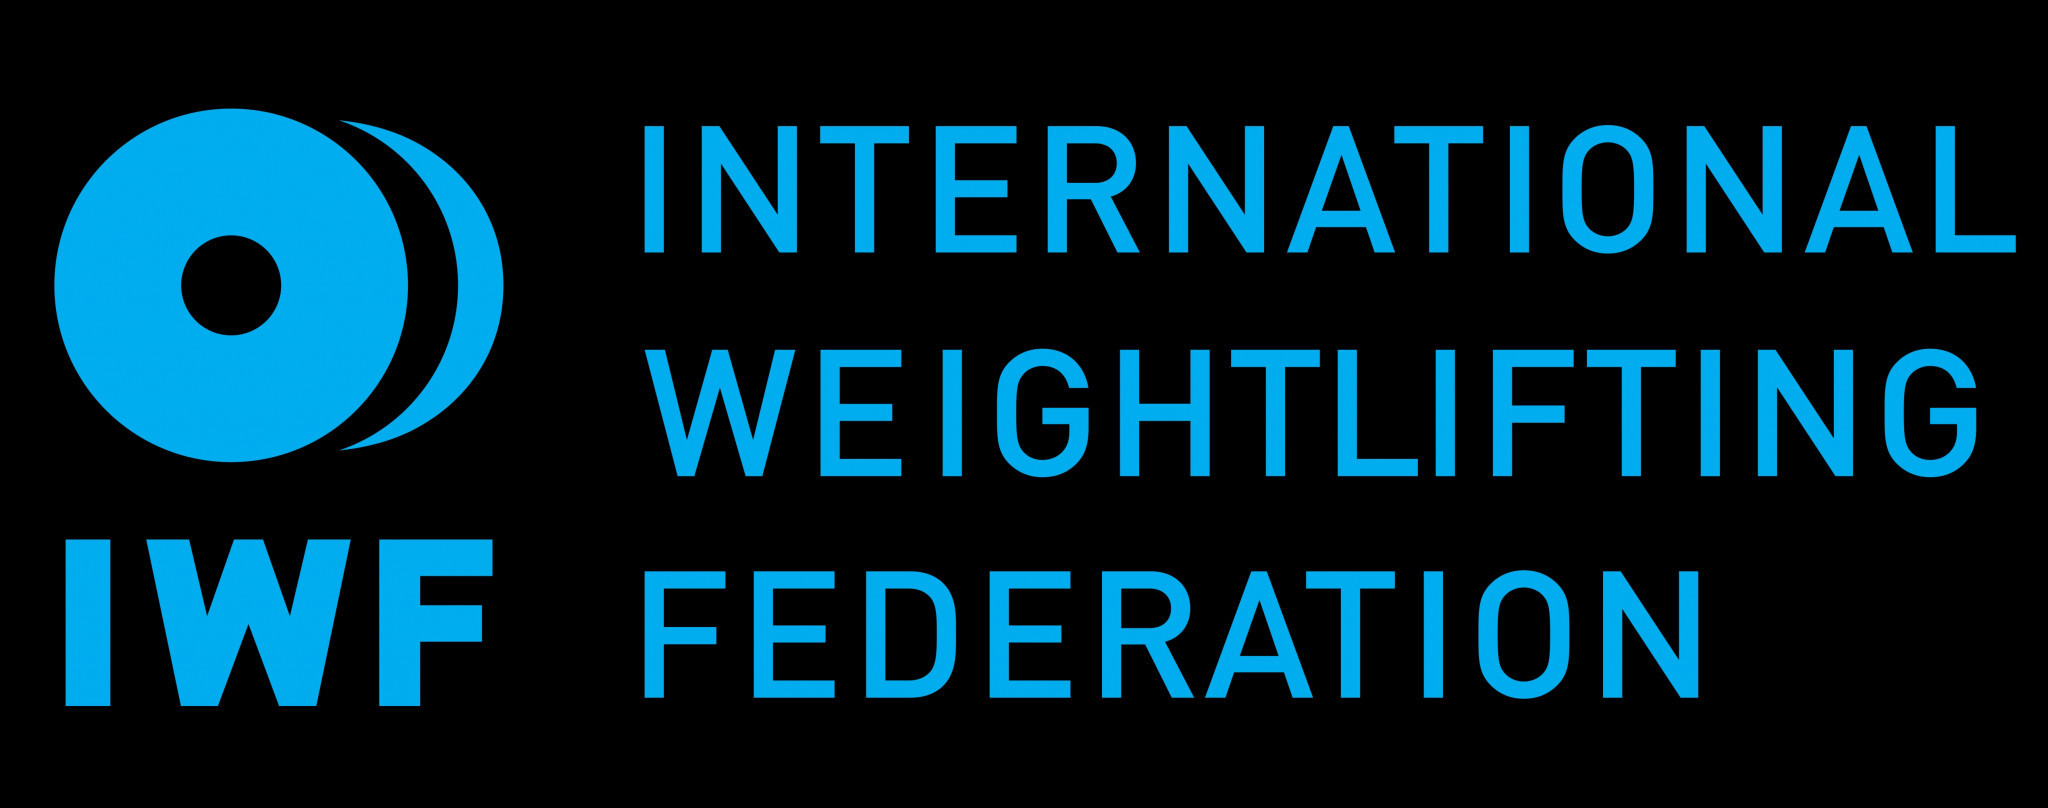 Ursula Papandrea has called for the International Weightlifting Federation to be renamed World Weightlifting as part of her 100 Days of Reform plan ©IWF